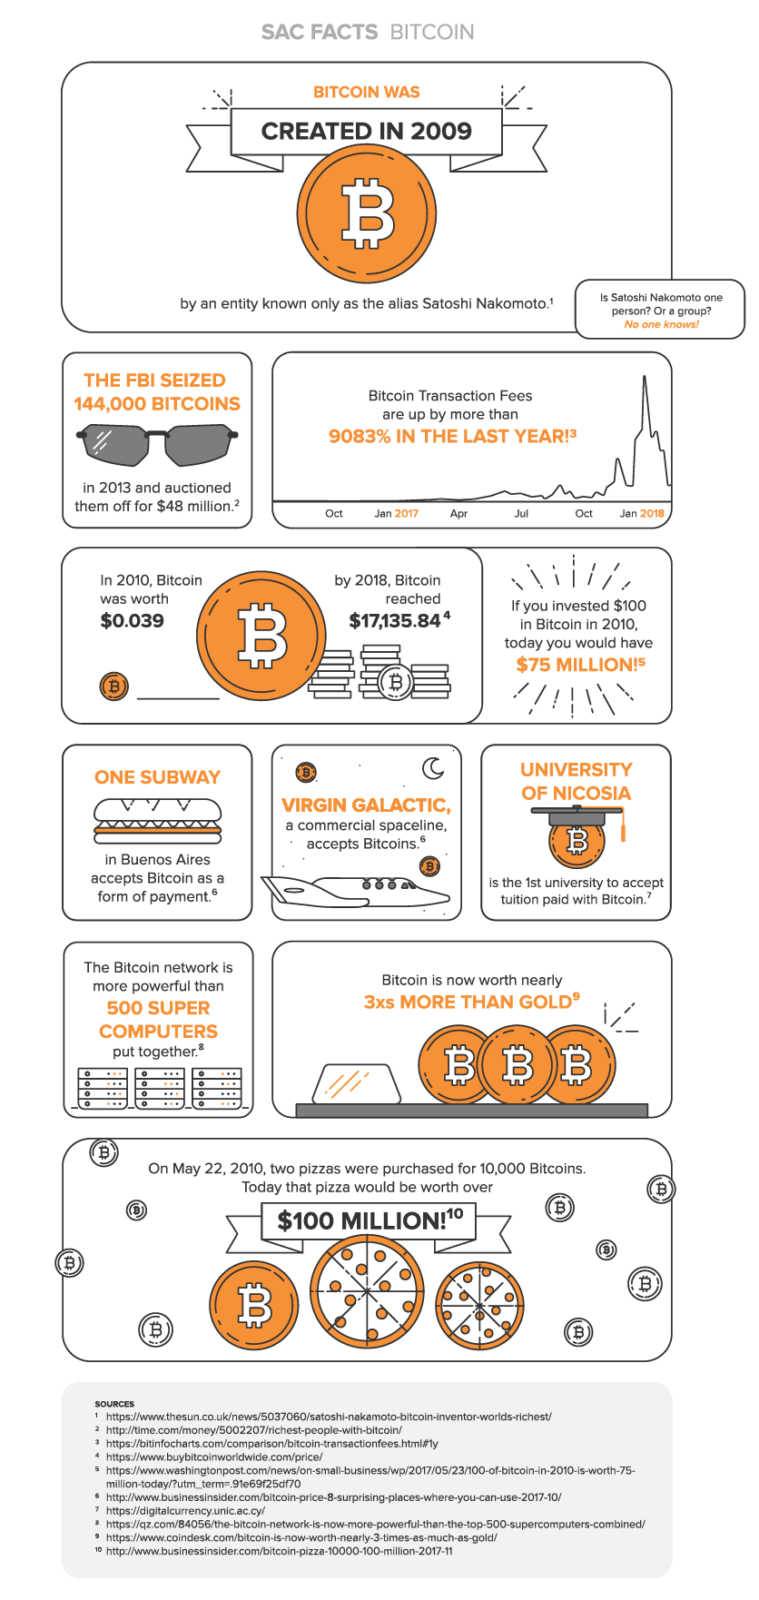 bitcoin infographic. Bitcoin was created in 2009 by mysterious alias Satoshi Nakomoto. FBI seized 144,000 bitcoins in 2013 and auctioned them off for $48 mill. Bitcoin transaction fees are up by more than 9083% in the last year. In 2010, bitcoin was worth $0.039. By 2018, bitcoin reached $17,135.84. If you invested $100 in 2010, today you would have $75 million! One Subway in Buenos Aires accepts Bitcoin as a form of payment. Virgin Galactic accepts bitcoins. University of Nicosia is the first university to accept tuition in bitcoins. Its network is more powerful than 500 super computers. bitcoin is now worth 3xs more than gold. on may 22 2010 two pizzas were bought with 10,000 bitcoins. Today that pizza would be worth over $100 million.